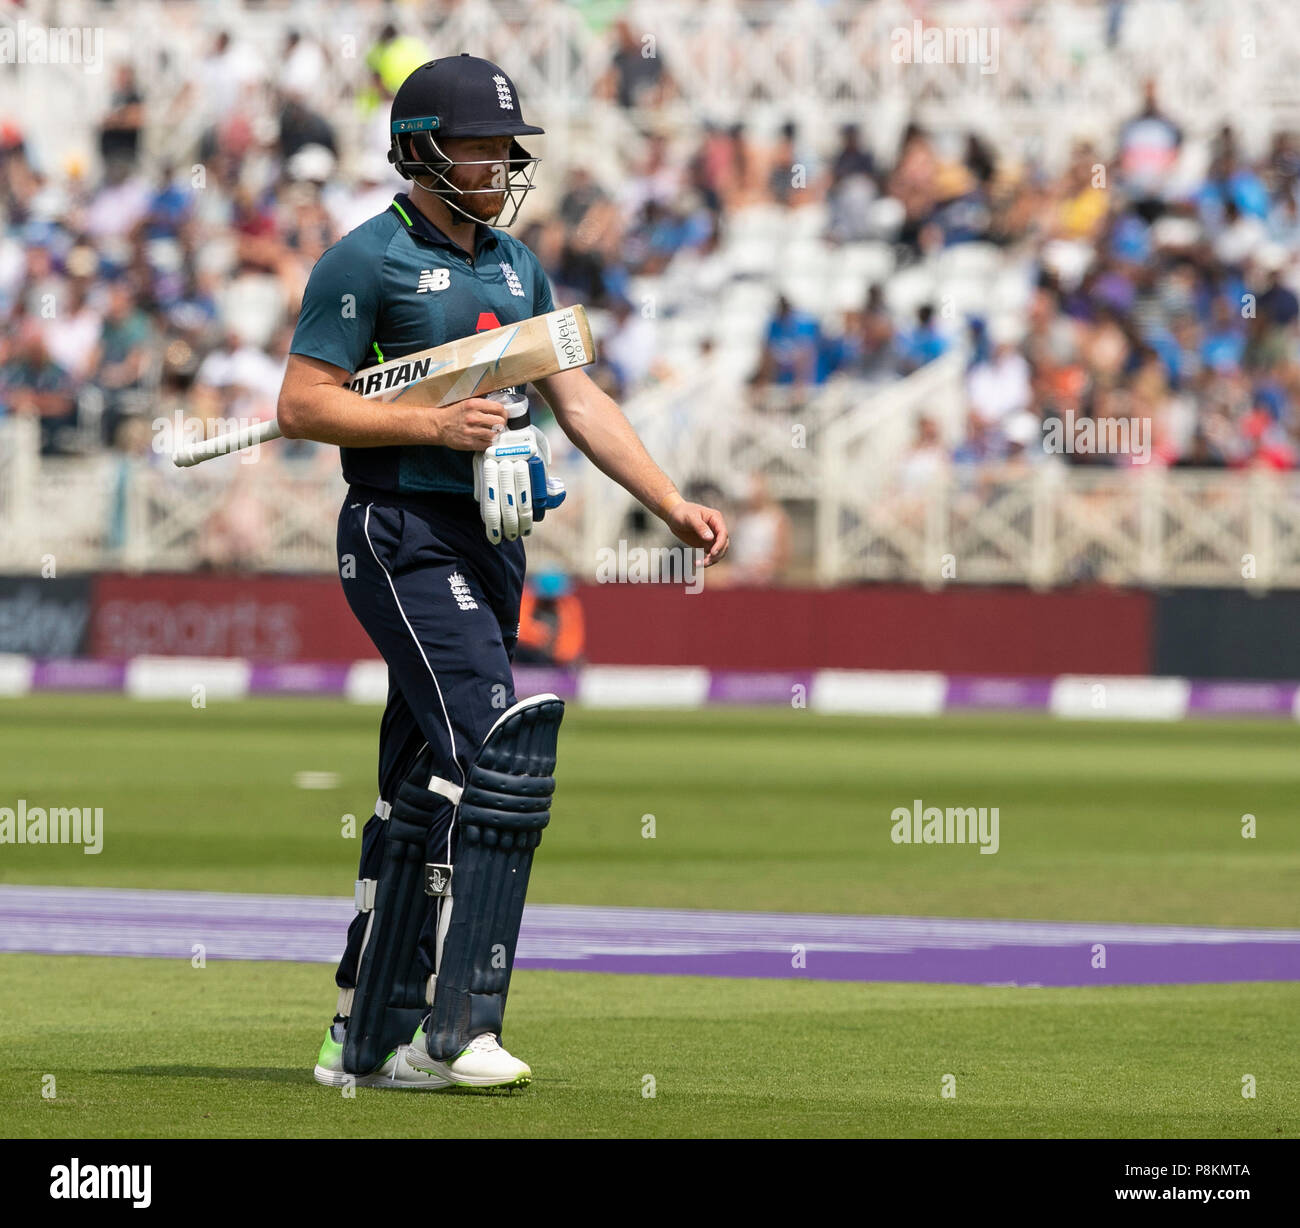 Nottingham, UK. 12th July 2018, Royal London, One Day International, England v India, Trent Bridge, Jonny Bairstow leaves the field after being given out on review Credit: David Kissman/Alamy Live News Stock Photo